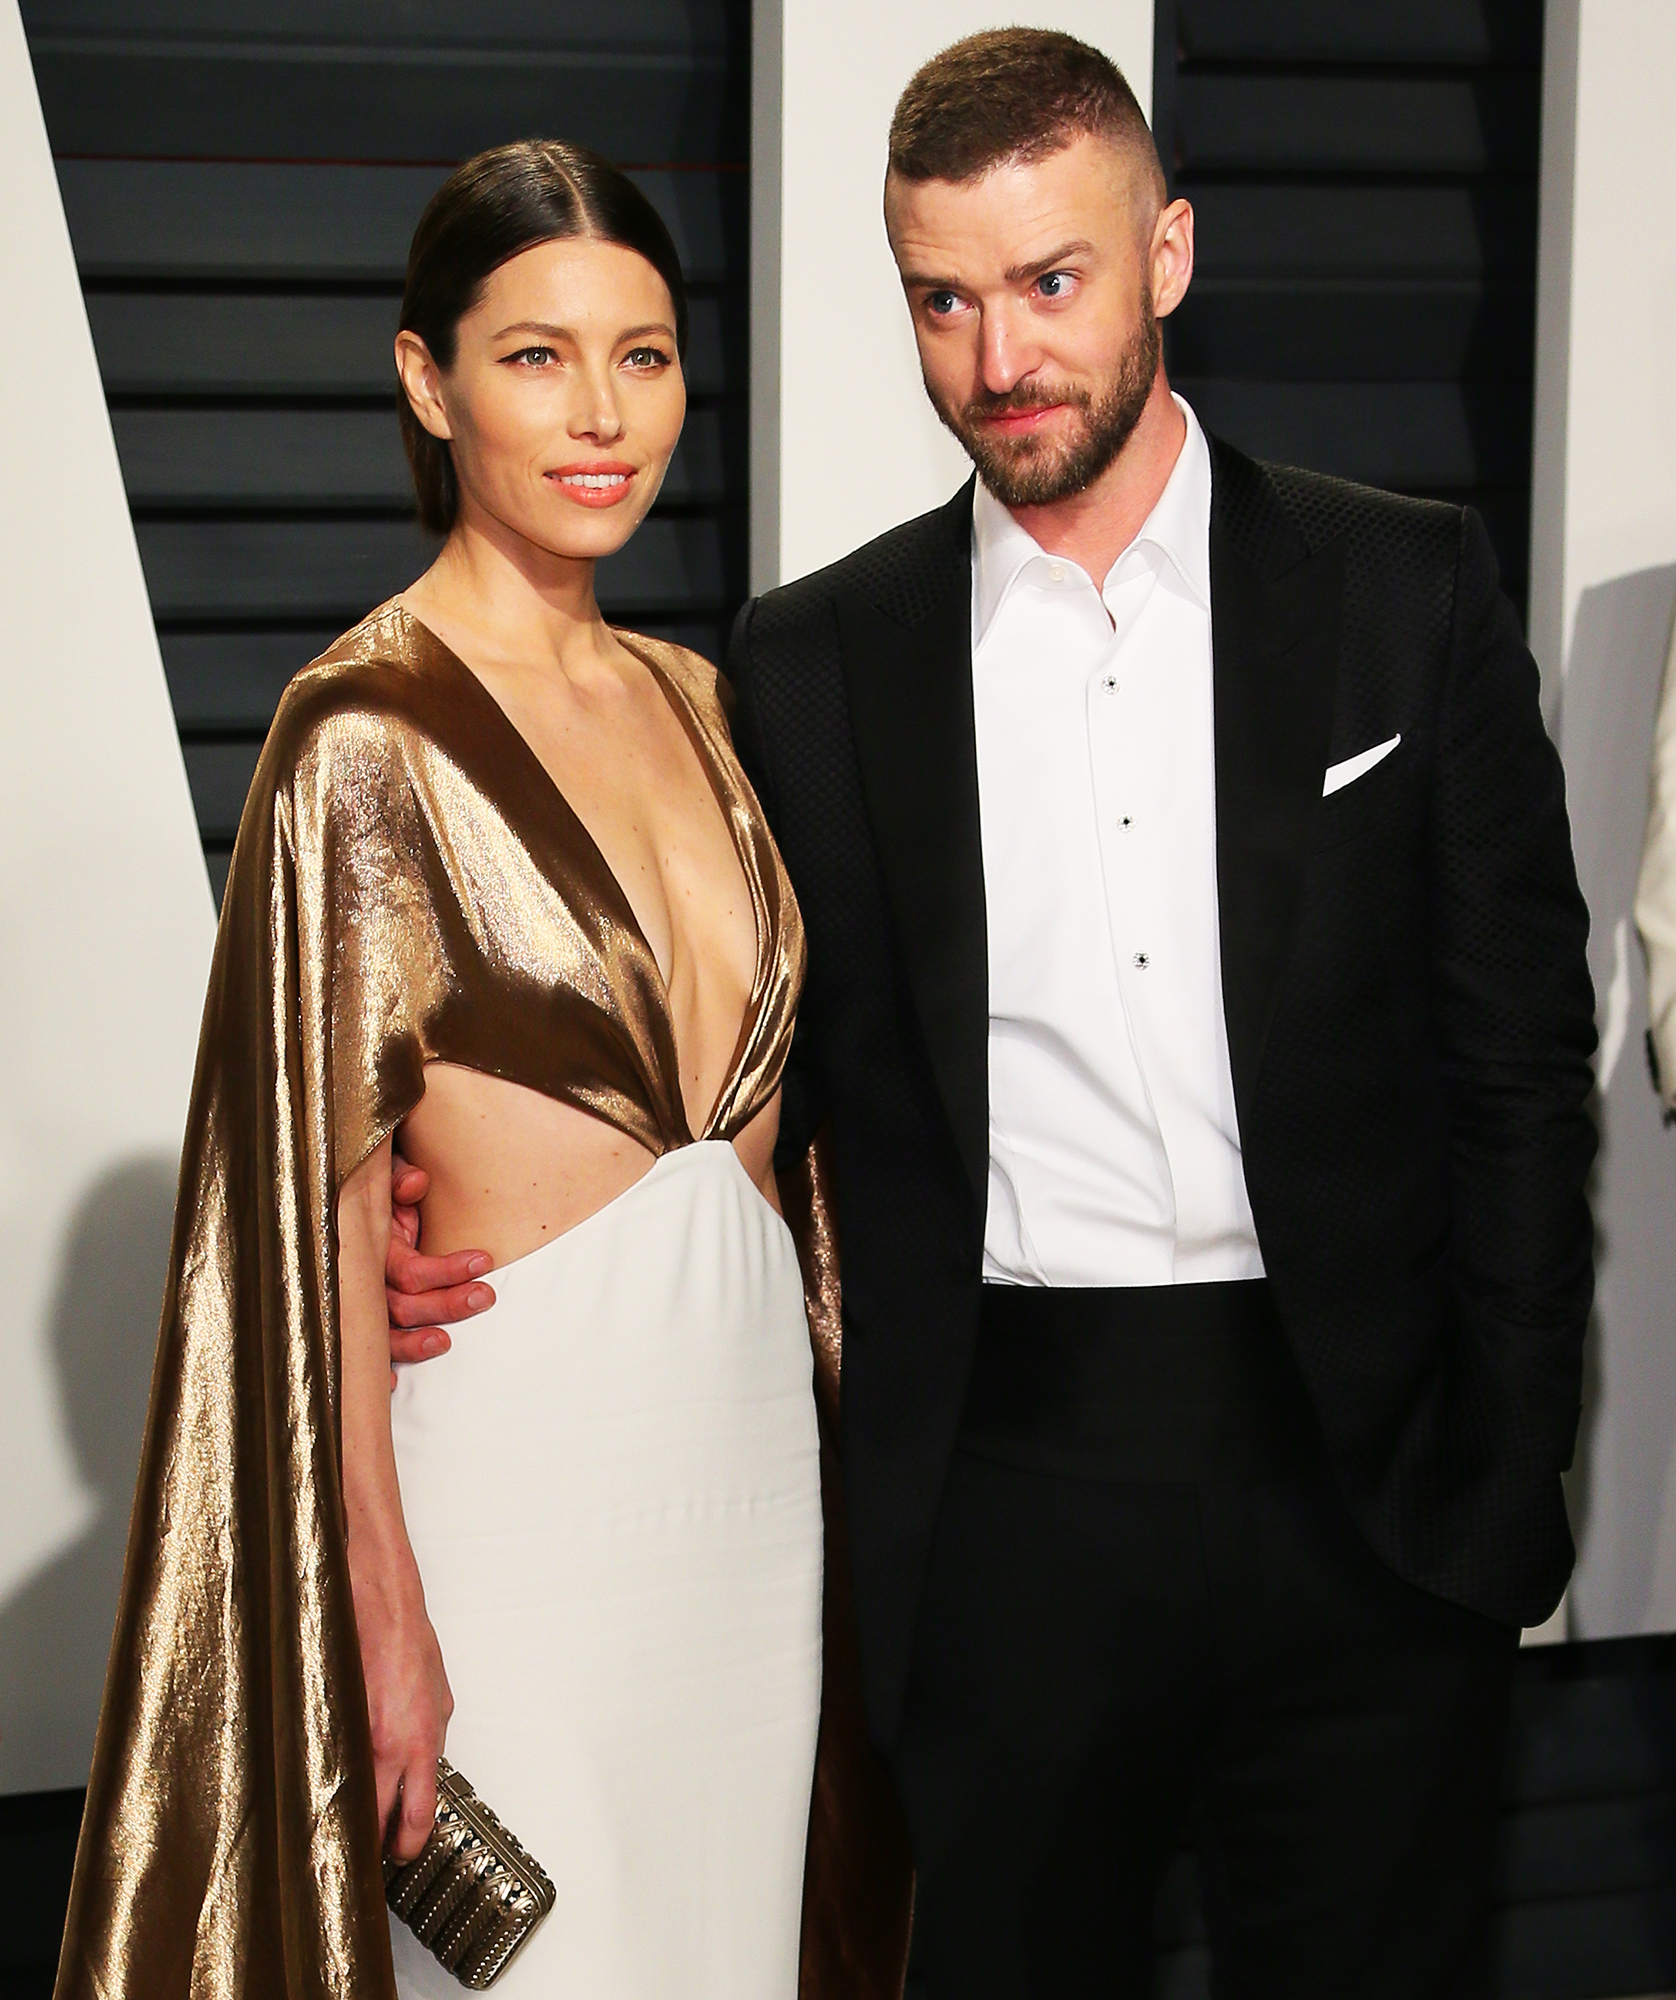 Justin Timberlake and Jessica Biel do cryotherapy dates